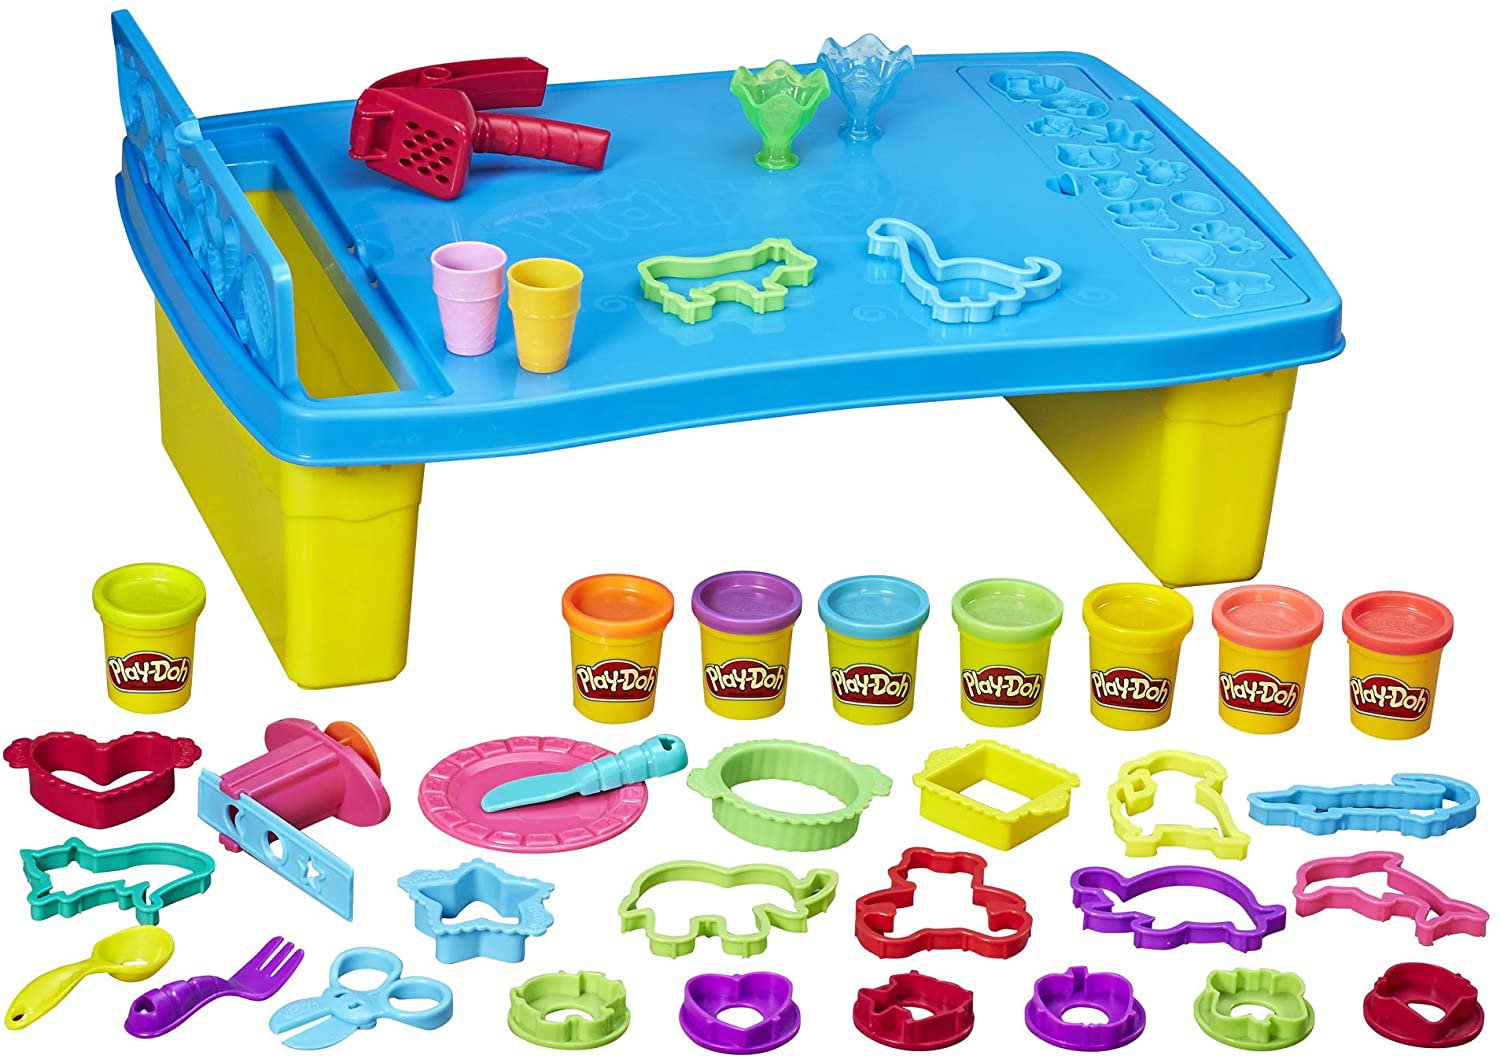 Play-Doh Play 'n Store Table, Arts & Crafts, Activity Table